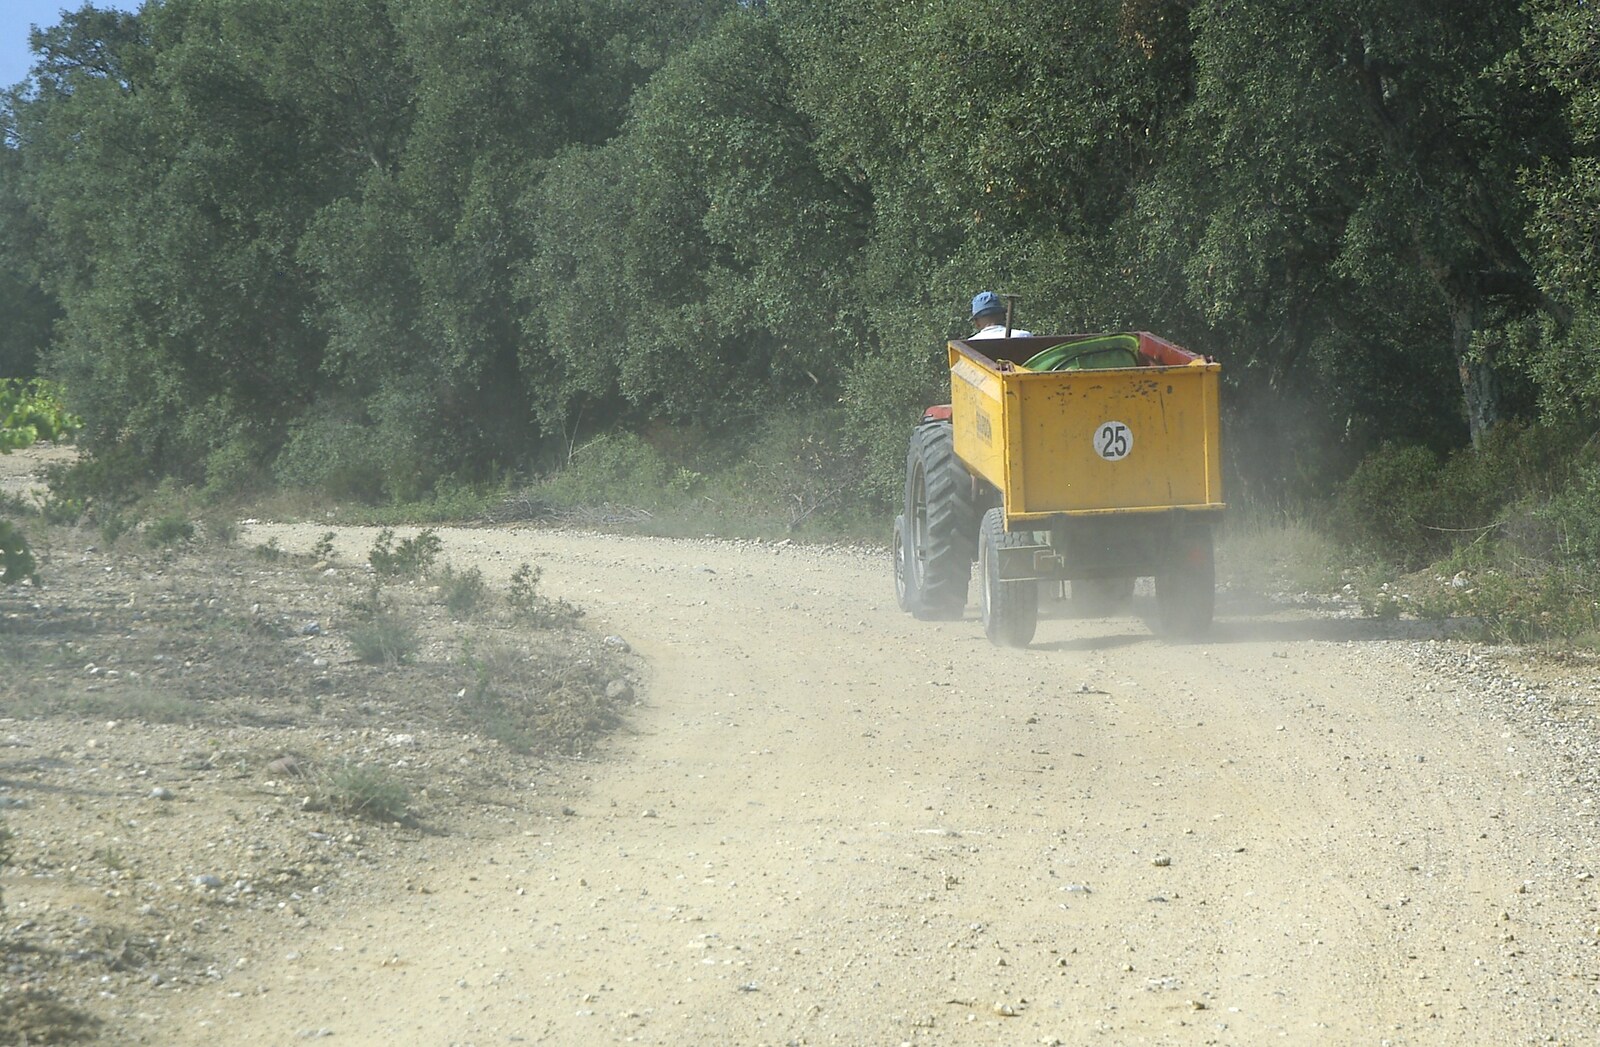 A tractor on the road between Fourques and Cerét from A Roussillon Farmhouse, Fourques, Perpignan, France - 17th September 2006